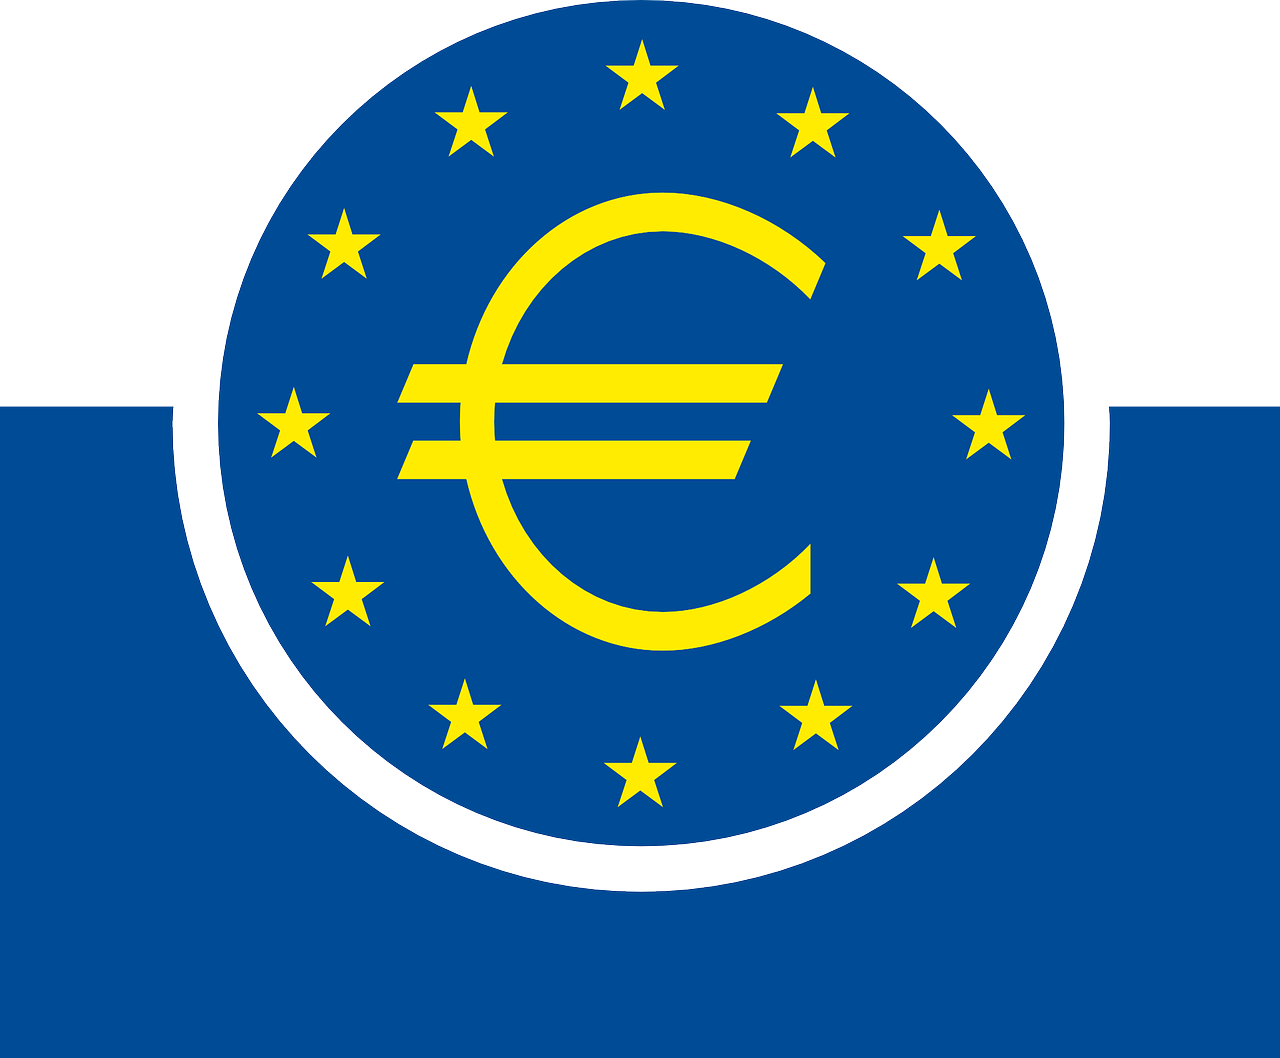 The European Central Bank (ECB) and its Monetary Policy